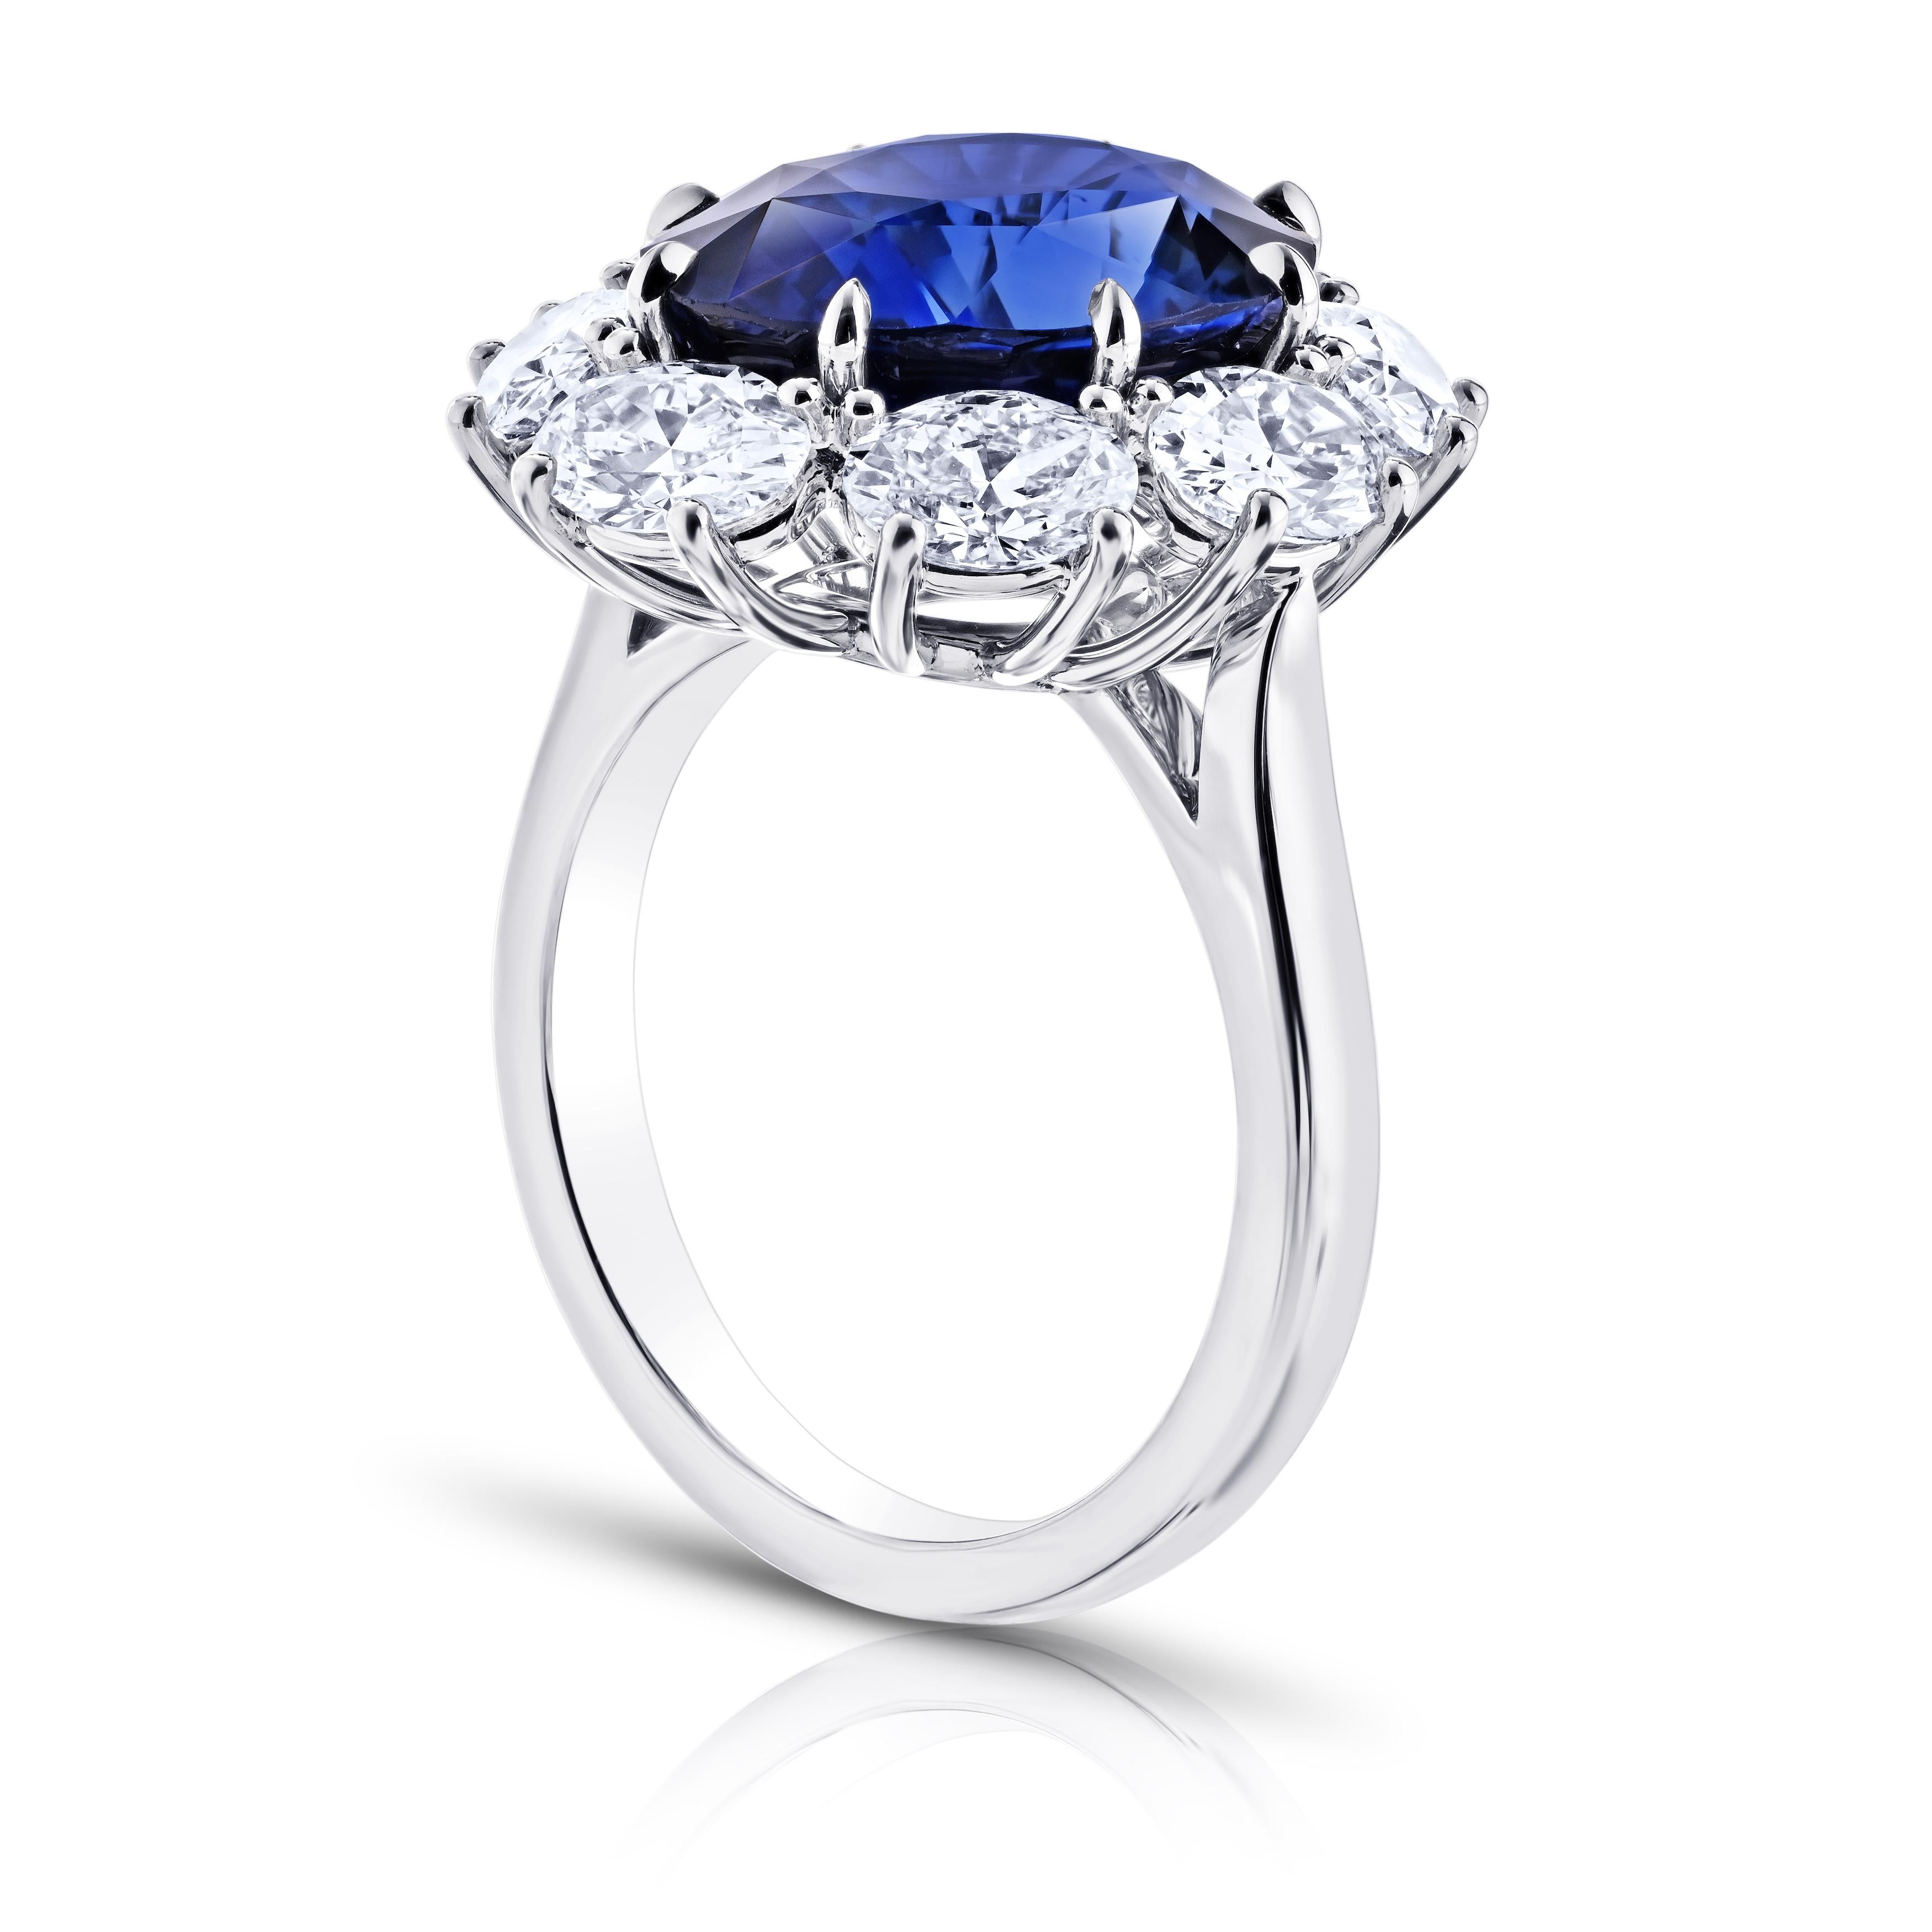 8.37 carat Oval Blue Sapphire with eight Oval Diamonds 2.66 carats set in a handmade Platinum ring